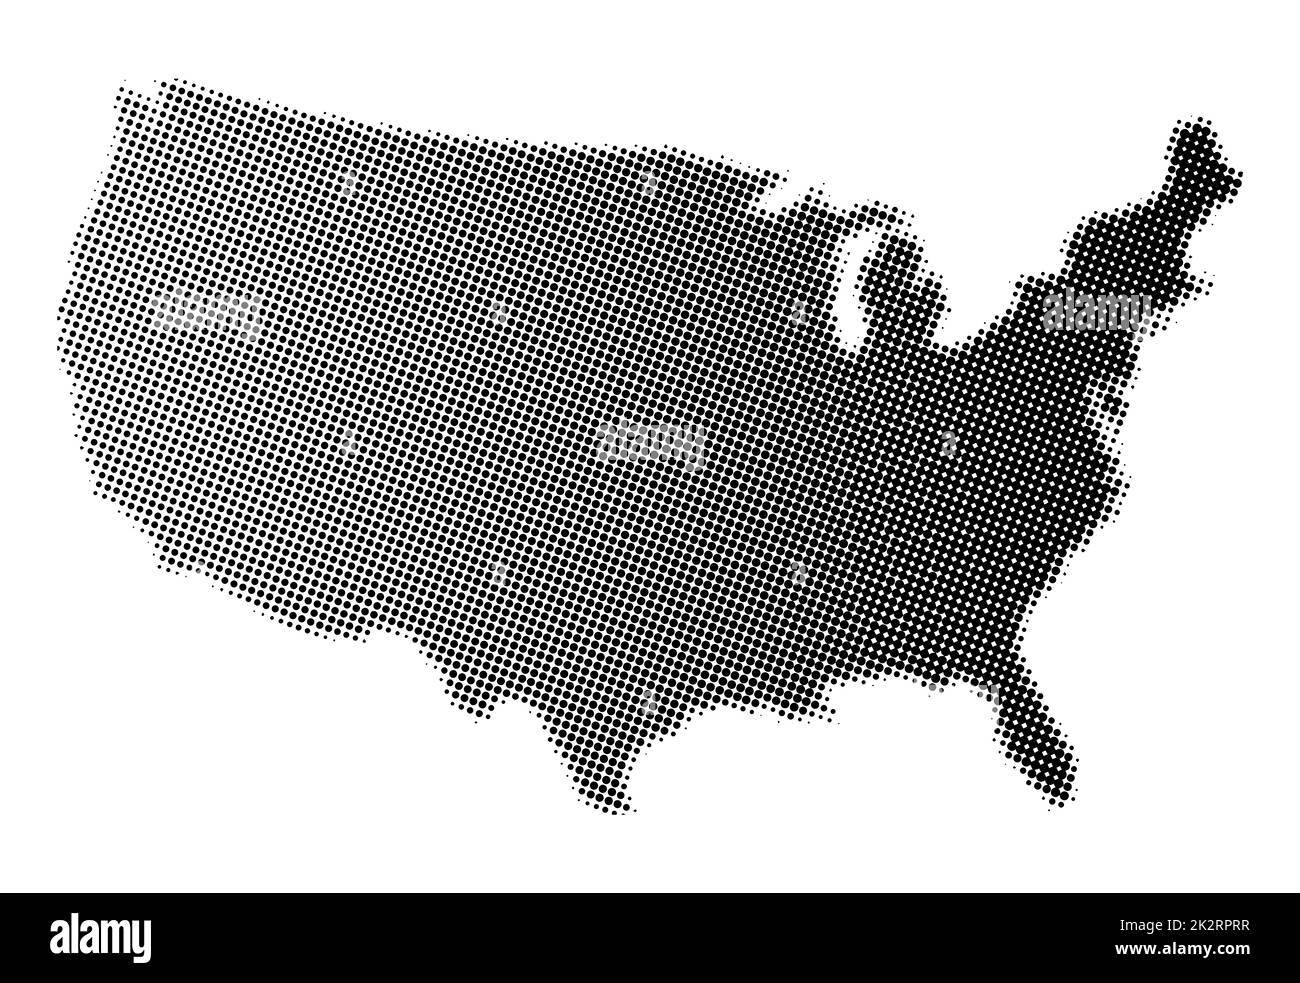 Map of The Unites States of America in black and white halftone Stock Photo